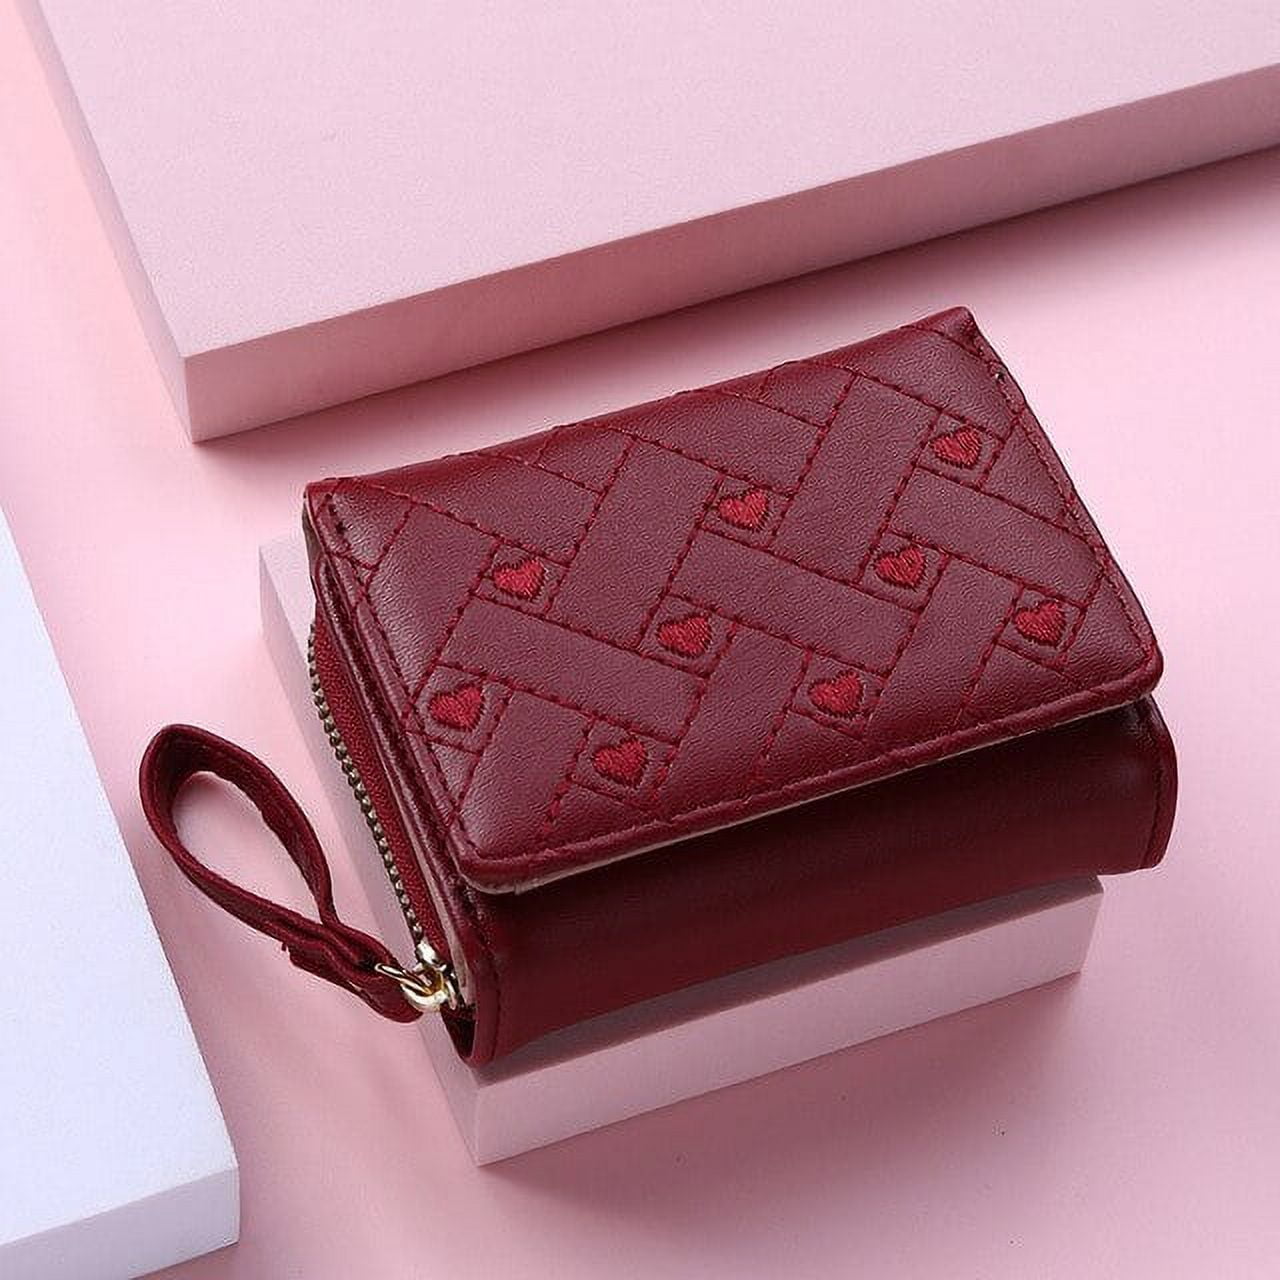 Buy Small Coin Purse For Women Leather Change Purse Clasp Closure Coin Pouch  Kiss-lock Cute Wallets,Mini Makeup Bag Portable for Gift, 1781BW,  4.3